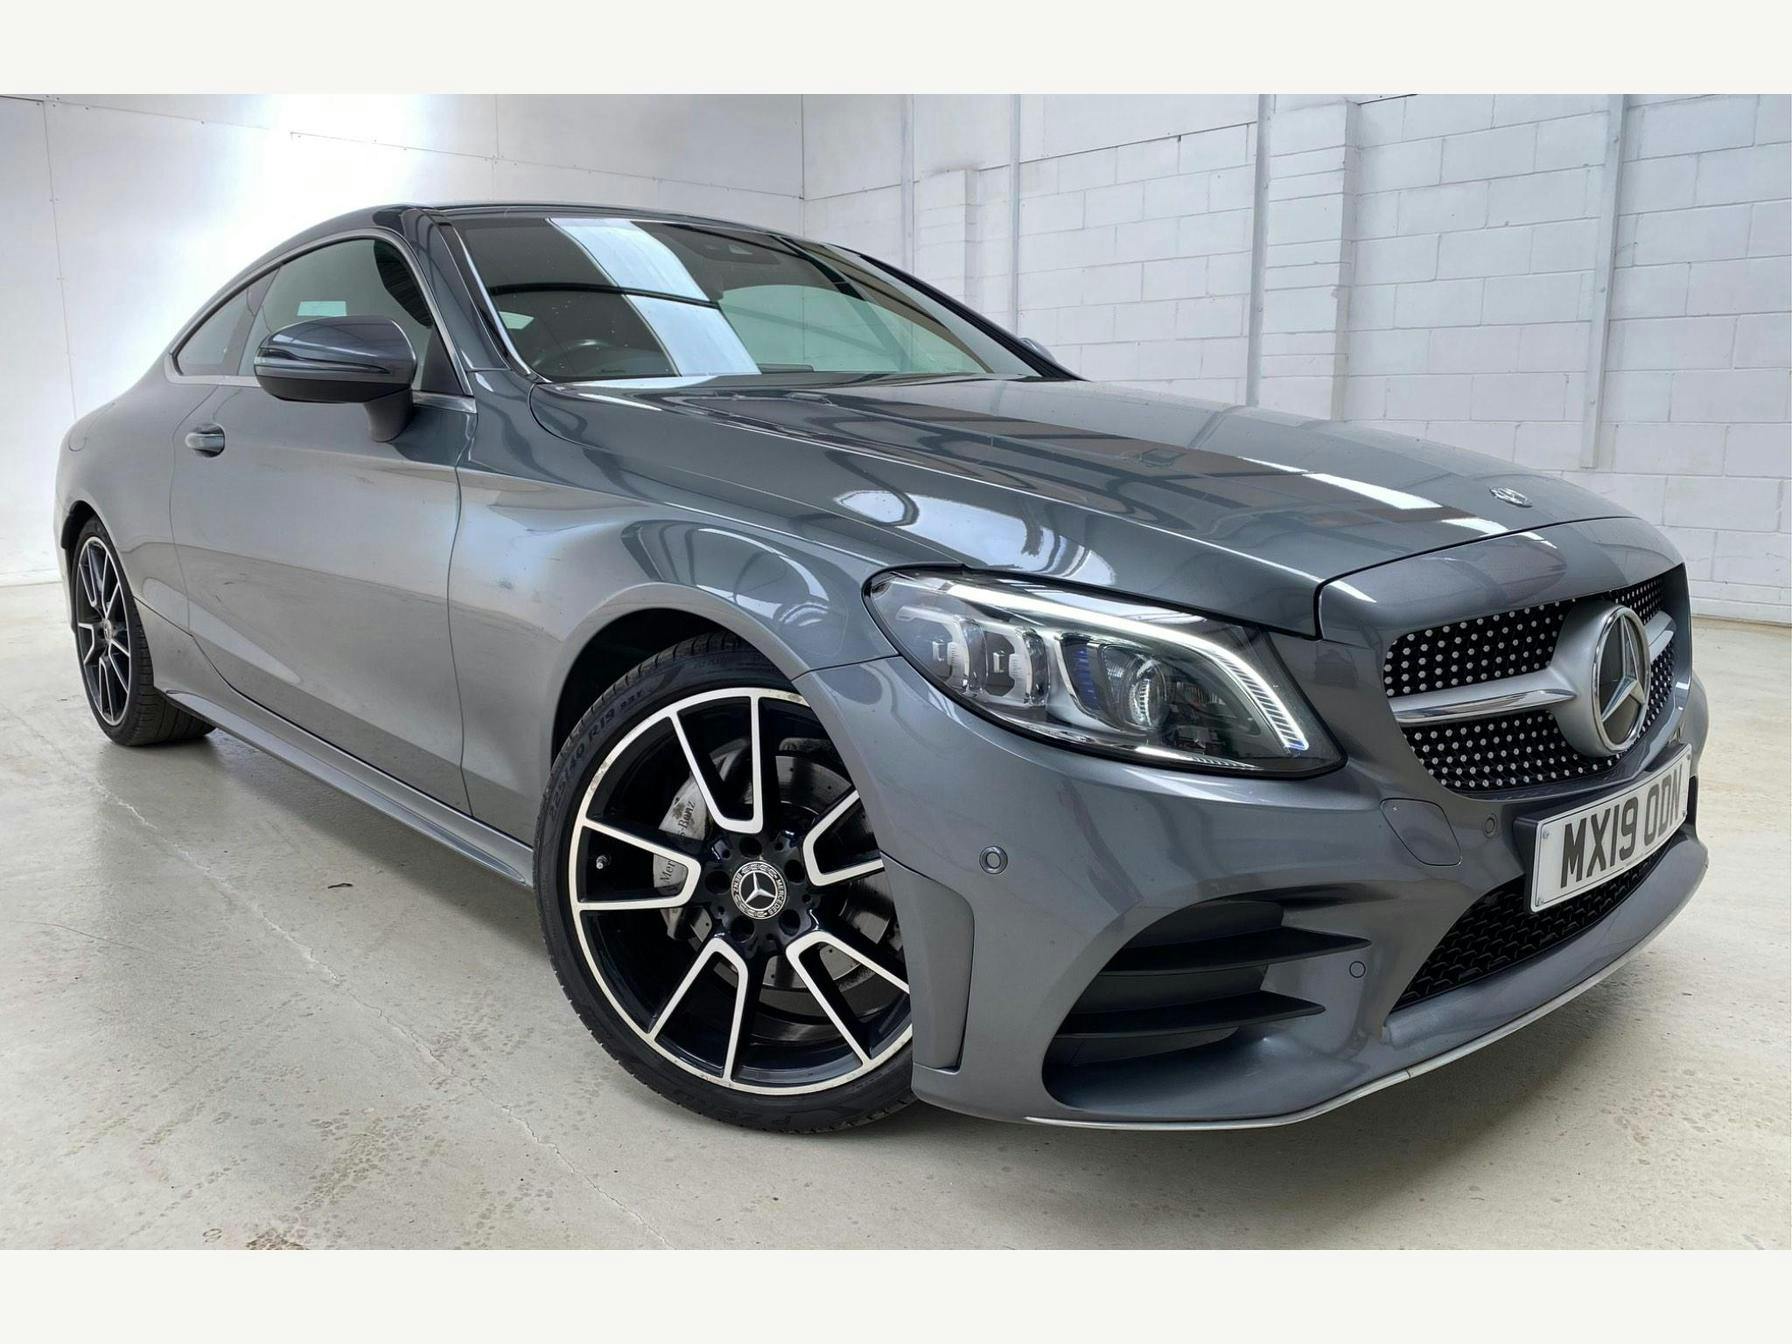 Mercedes Benz C Class 1.5 C200 Mhev Amg Line (premium) G-tronic+ Euro 6 (s/s) 2dr Coupe 2019